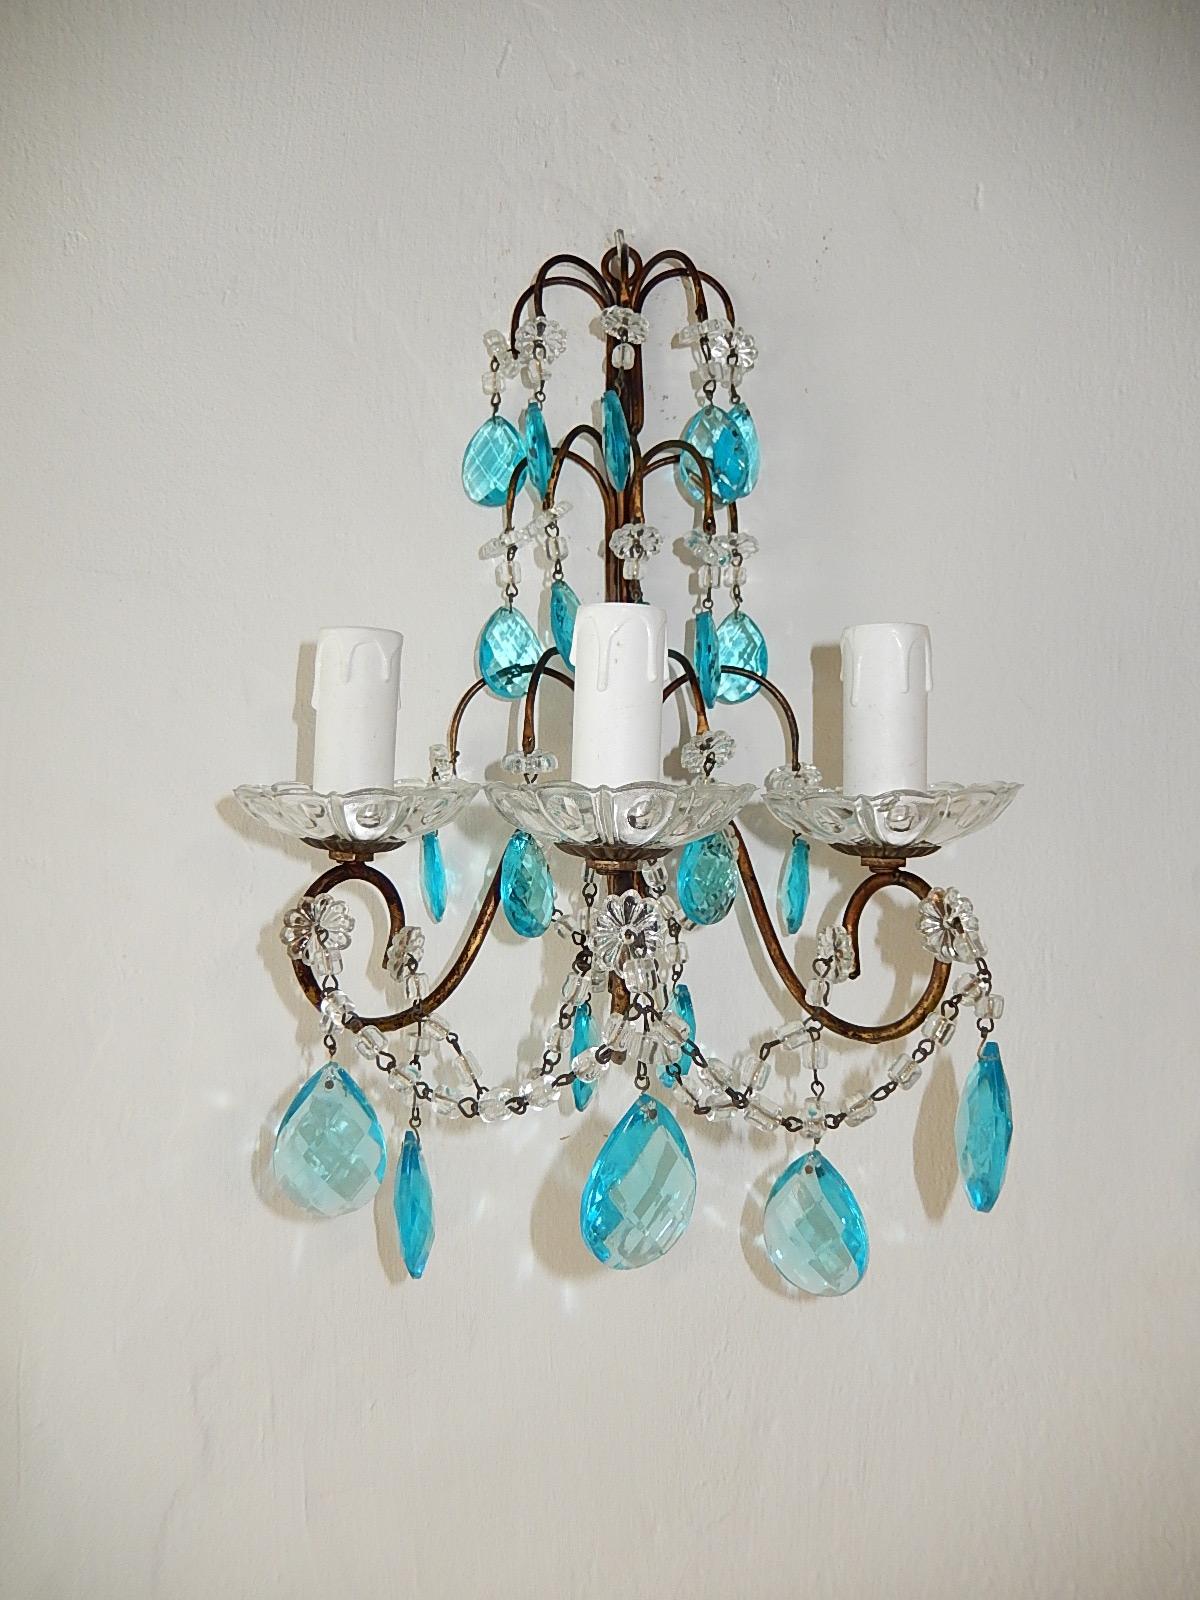 1920 French Aqua Blue Crystal Prisms and Swags Sconces For Sale 1